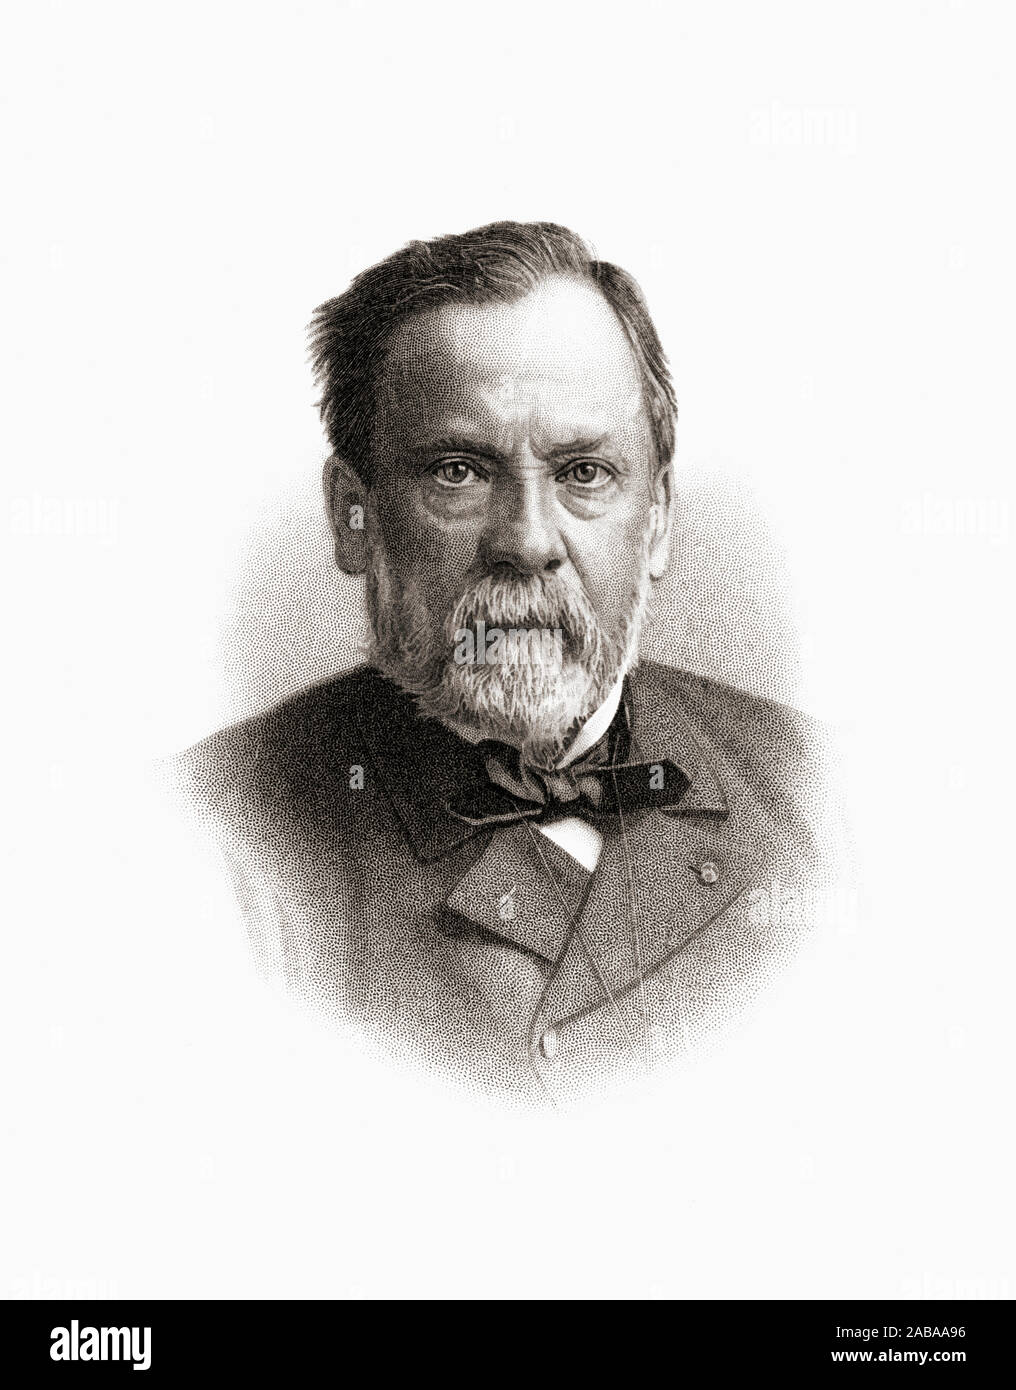 Louis Pasteur, 1822 –1895. French biologist, microbiologist and chemist renowned for his discoveries of the principles of vaccination, microbial fermentation and pasteurization. Stock Photo